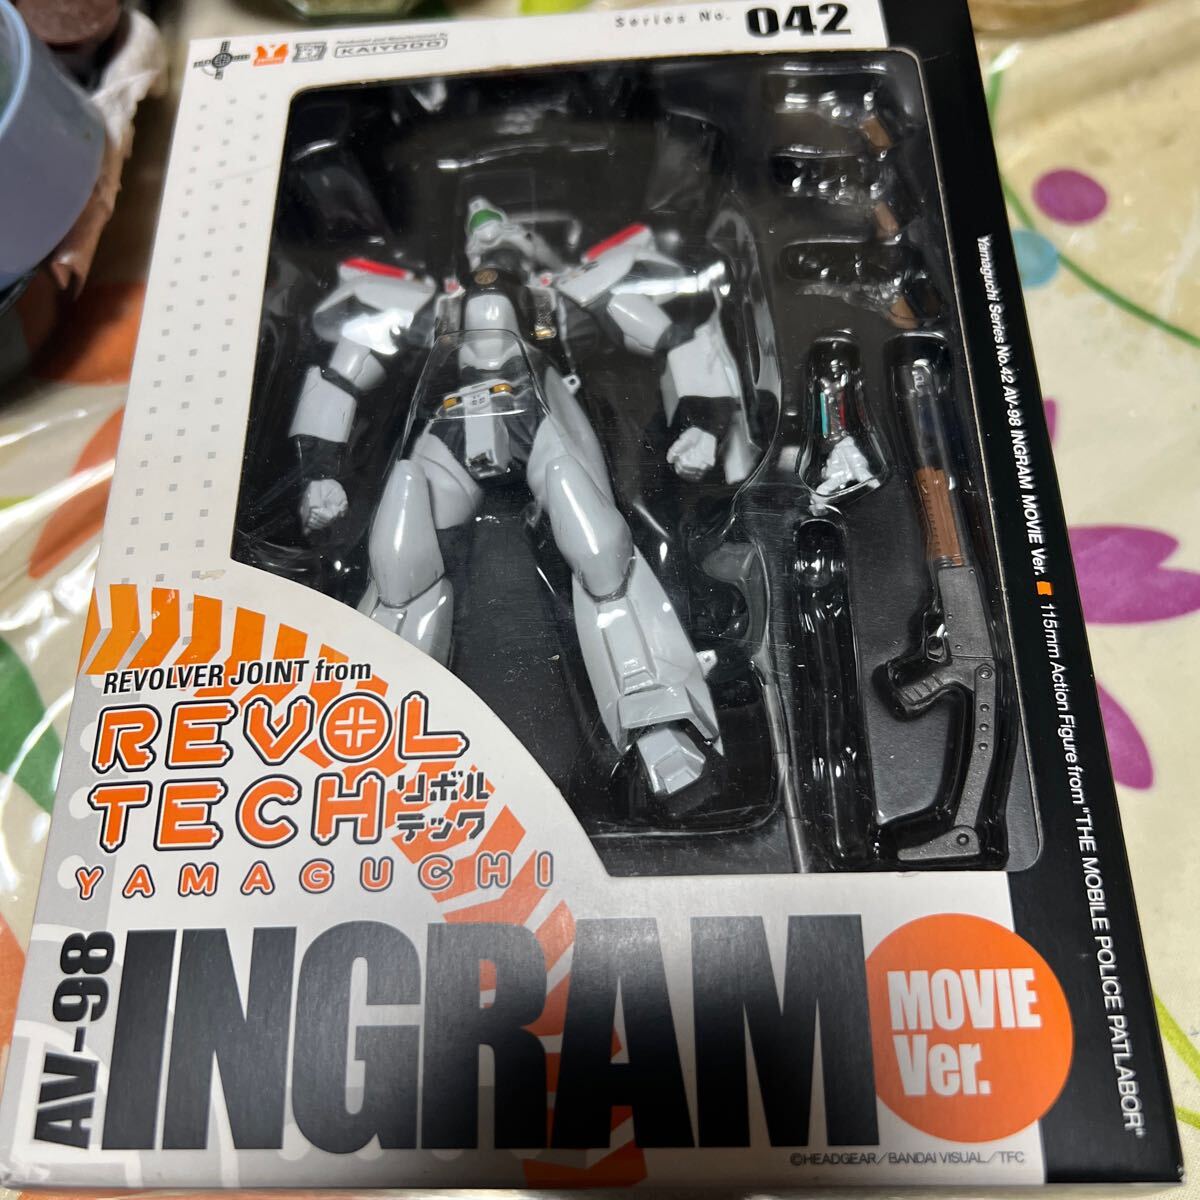  Mobile Police Patlabor Revoltech Kaiyodo theater version in gram 2 serial number new goods unopened prompt decision 